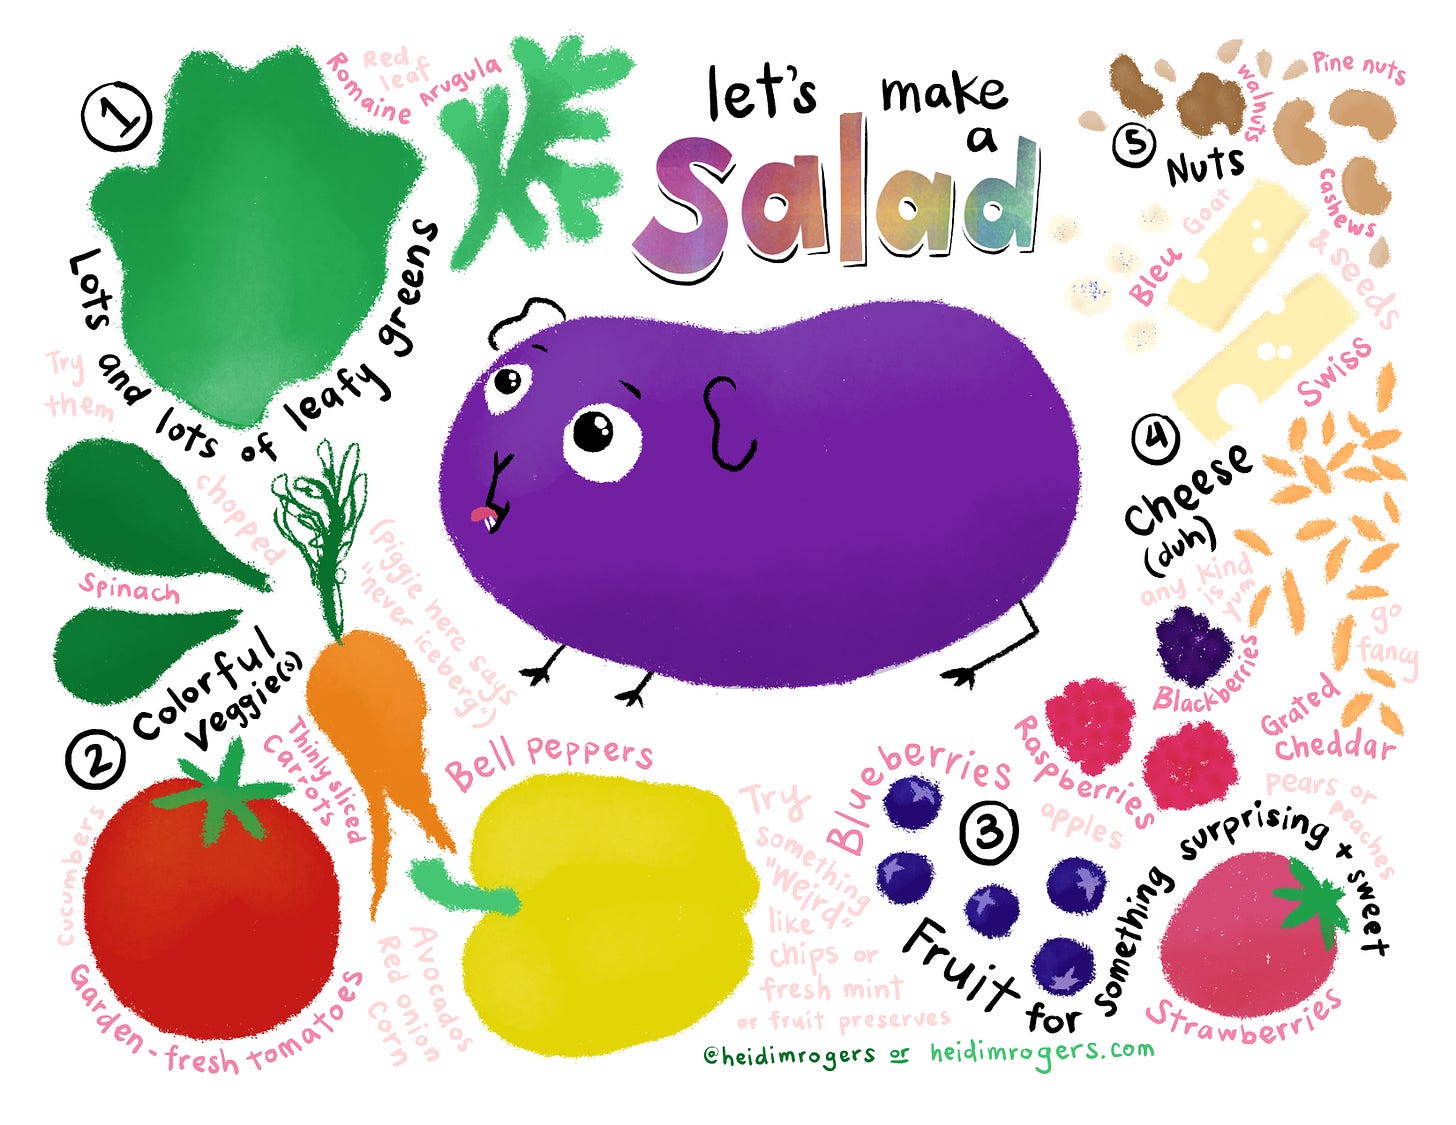 Infographic of an illustrated purple guinea pig surrounded by salad ingredients. Title says "let's make a salad!"